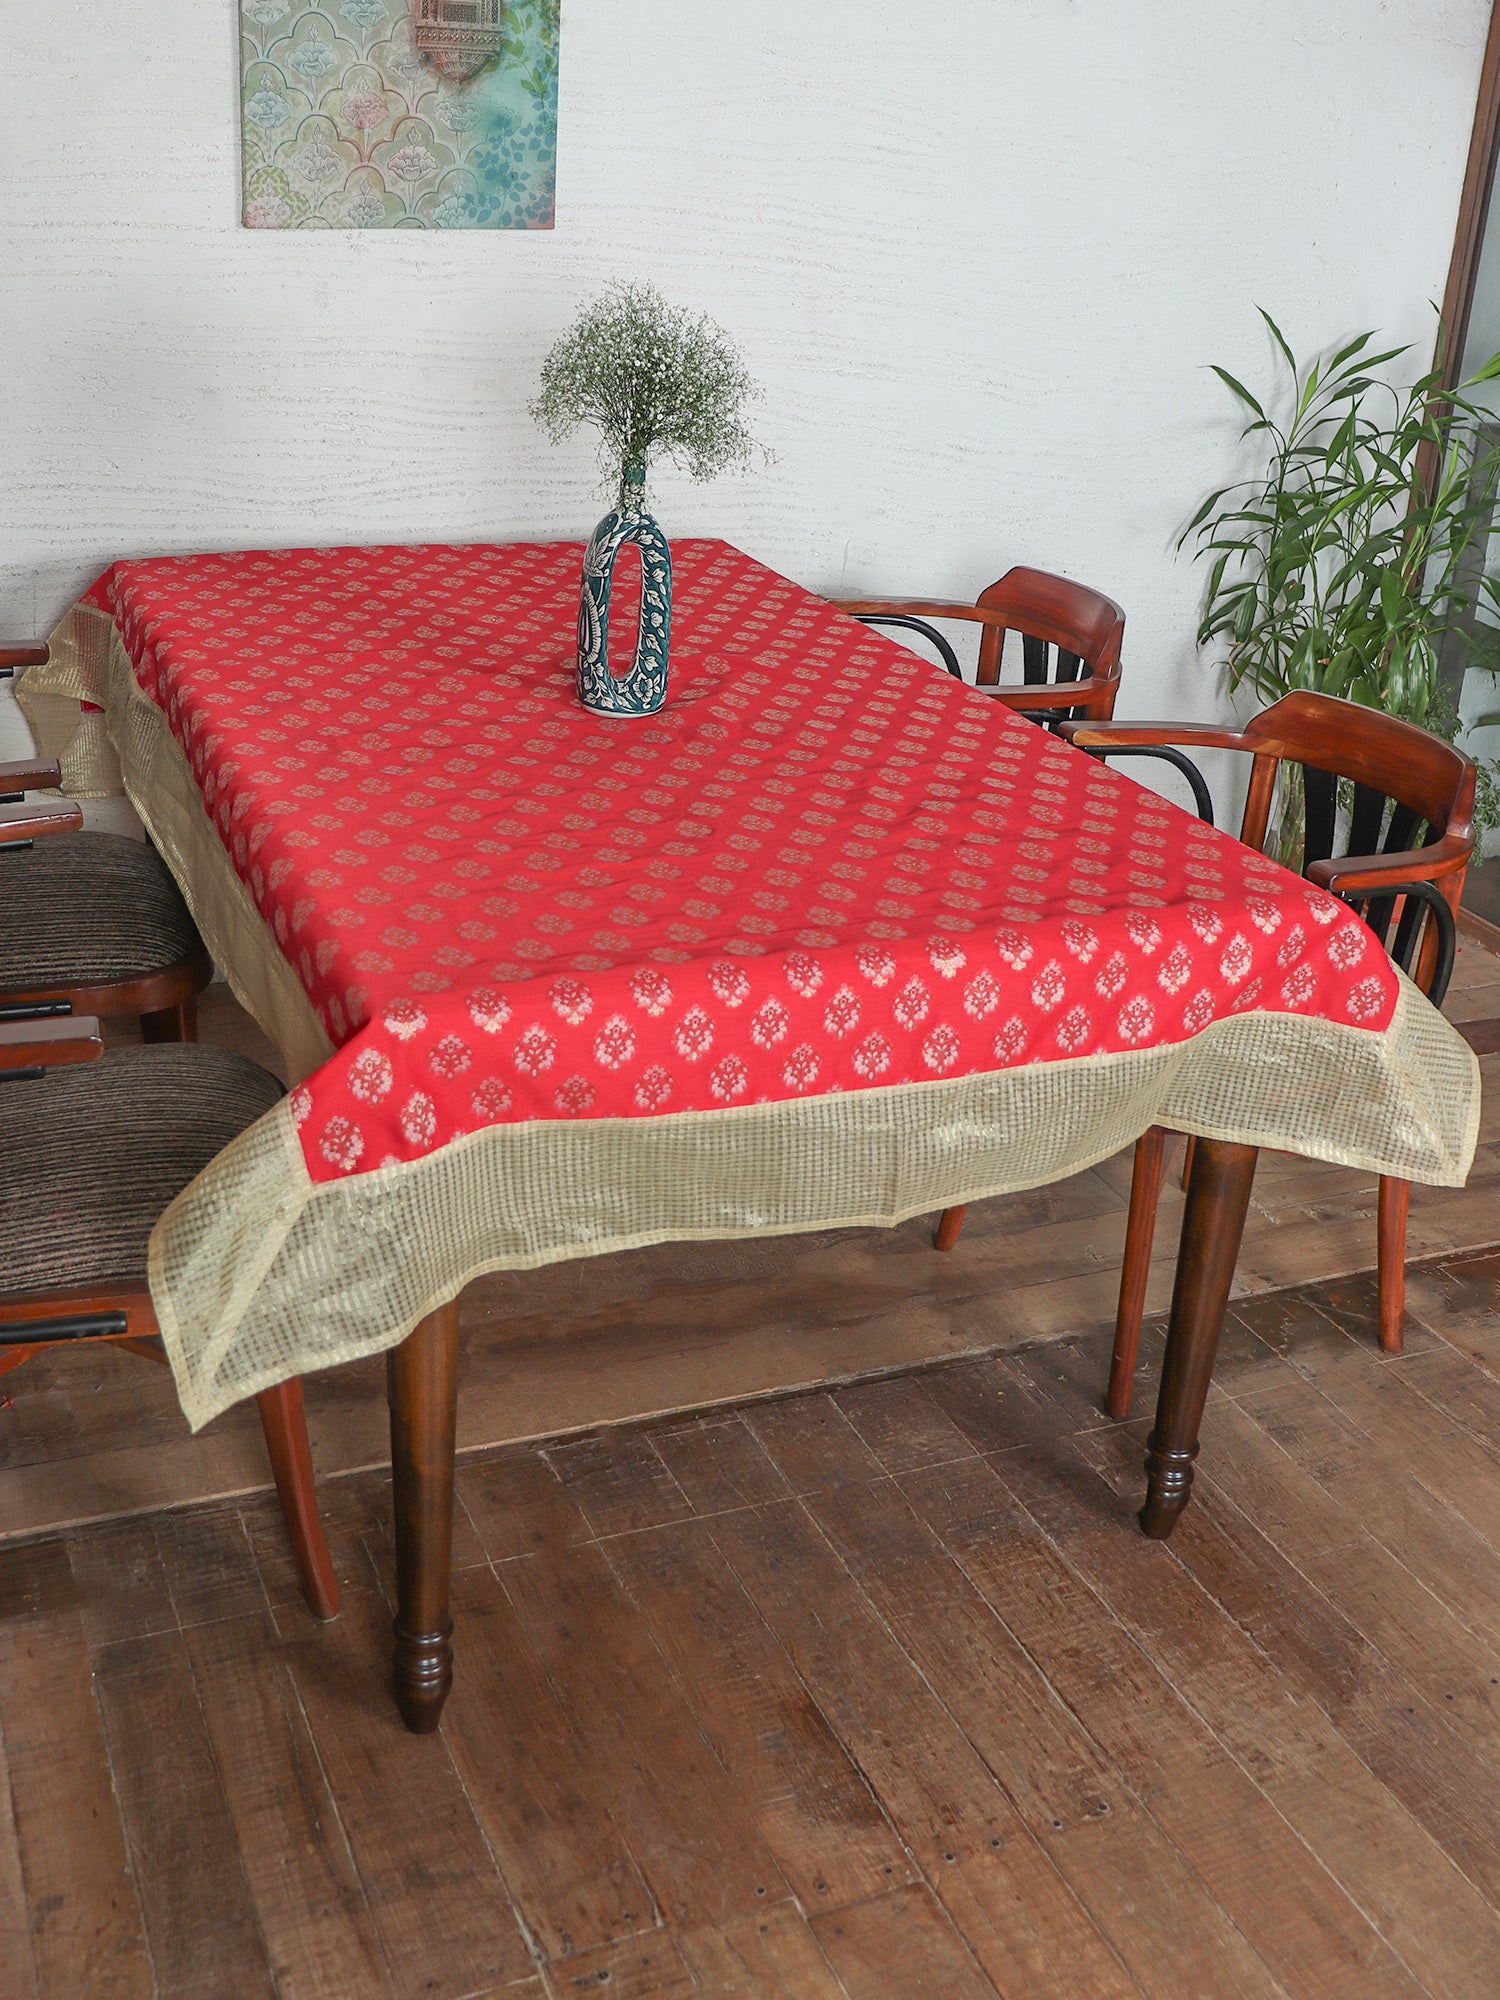 Table Cover Motif with Self Textured  Brocade Silk and Border Patchwork | Red and Gold | Heat Resistant Table Cover for Kitchen Table/Dining Table Cloth, 52 X 84 Inches; 130 cm X 210 cm 